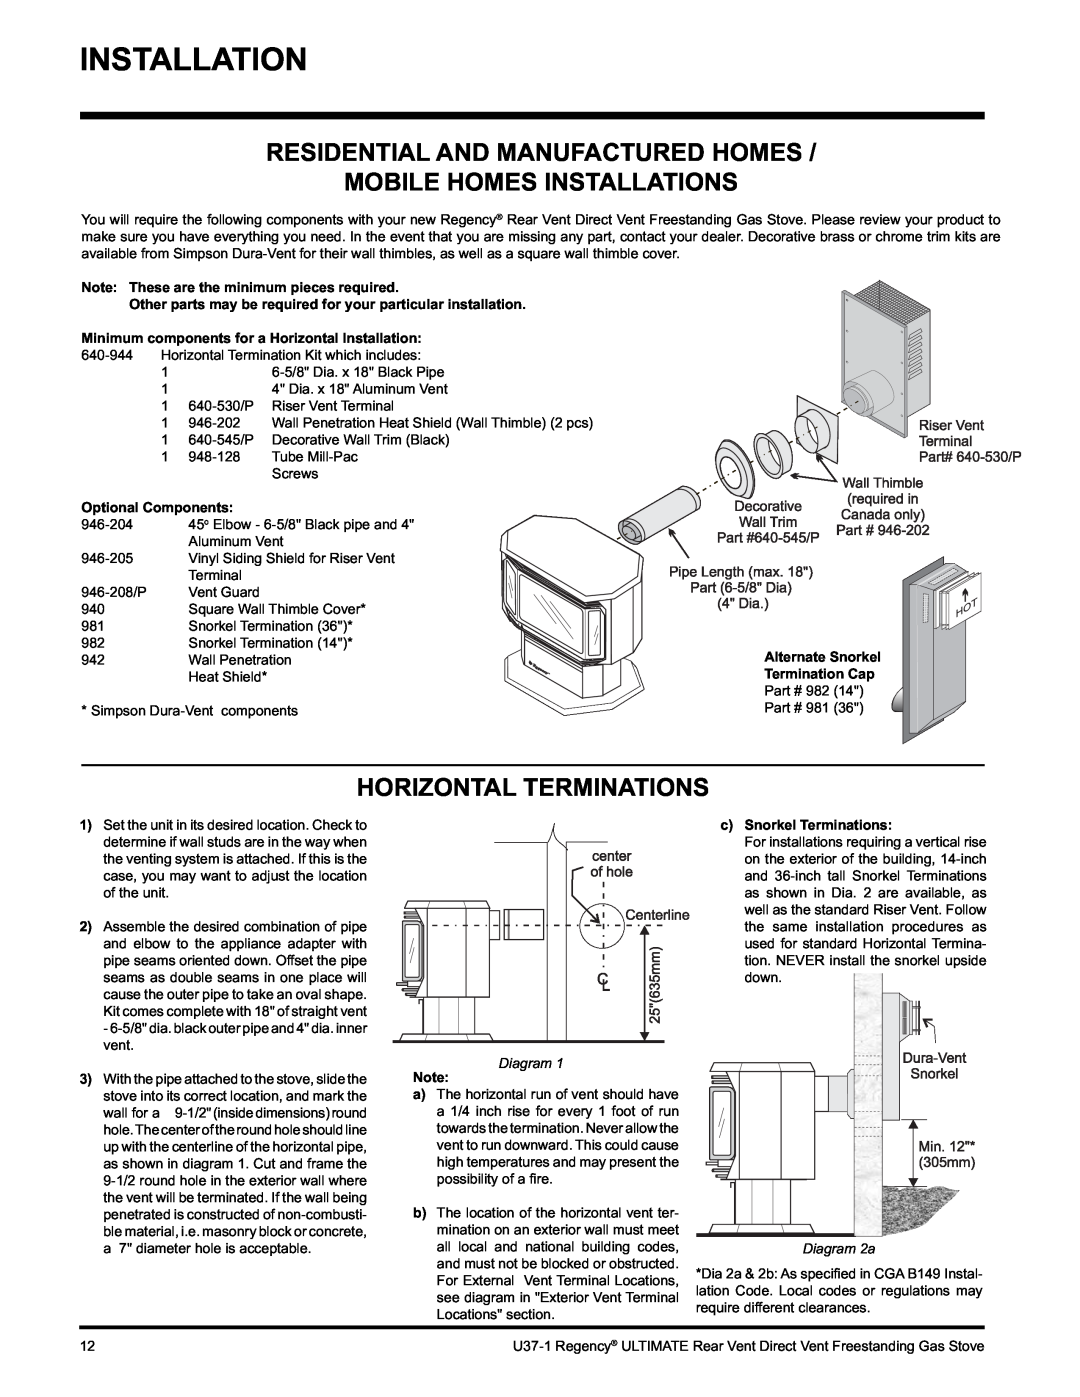 Regency U37-LP1 Residential And Manufactured Homes, Mobile Homes Installations, Horizontal Terminations, Diagram 